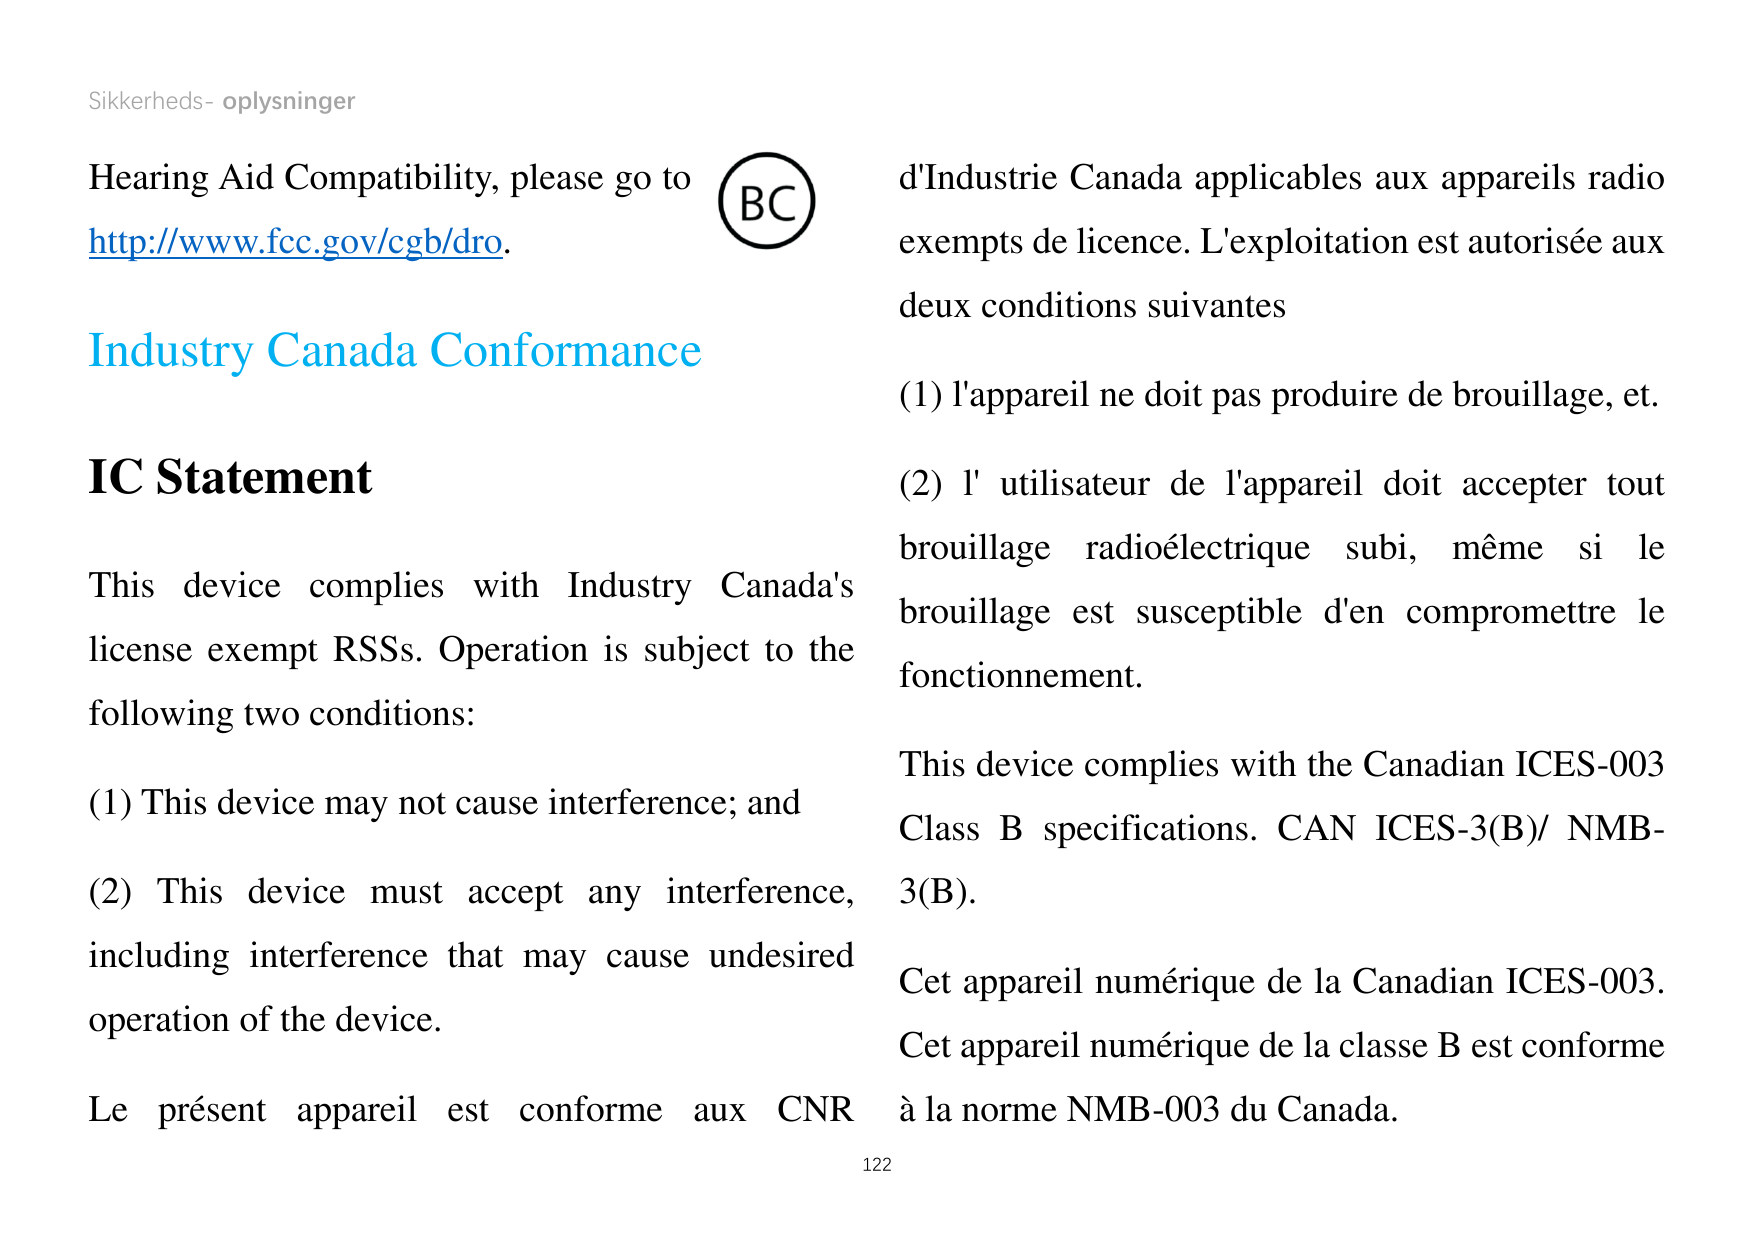 Sikkerheds- oplysningerHearing Aid Compatibility, please go tod'Industrie Canada applicables aux appareils radiohttp://www.fcc.g